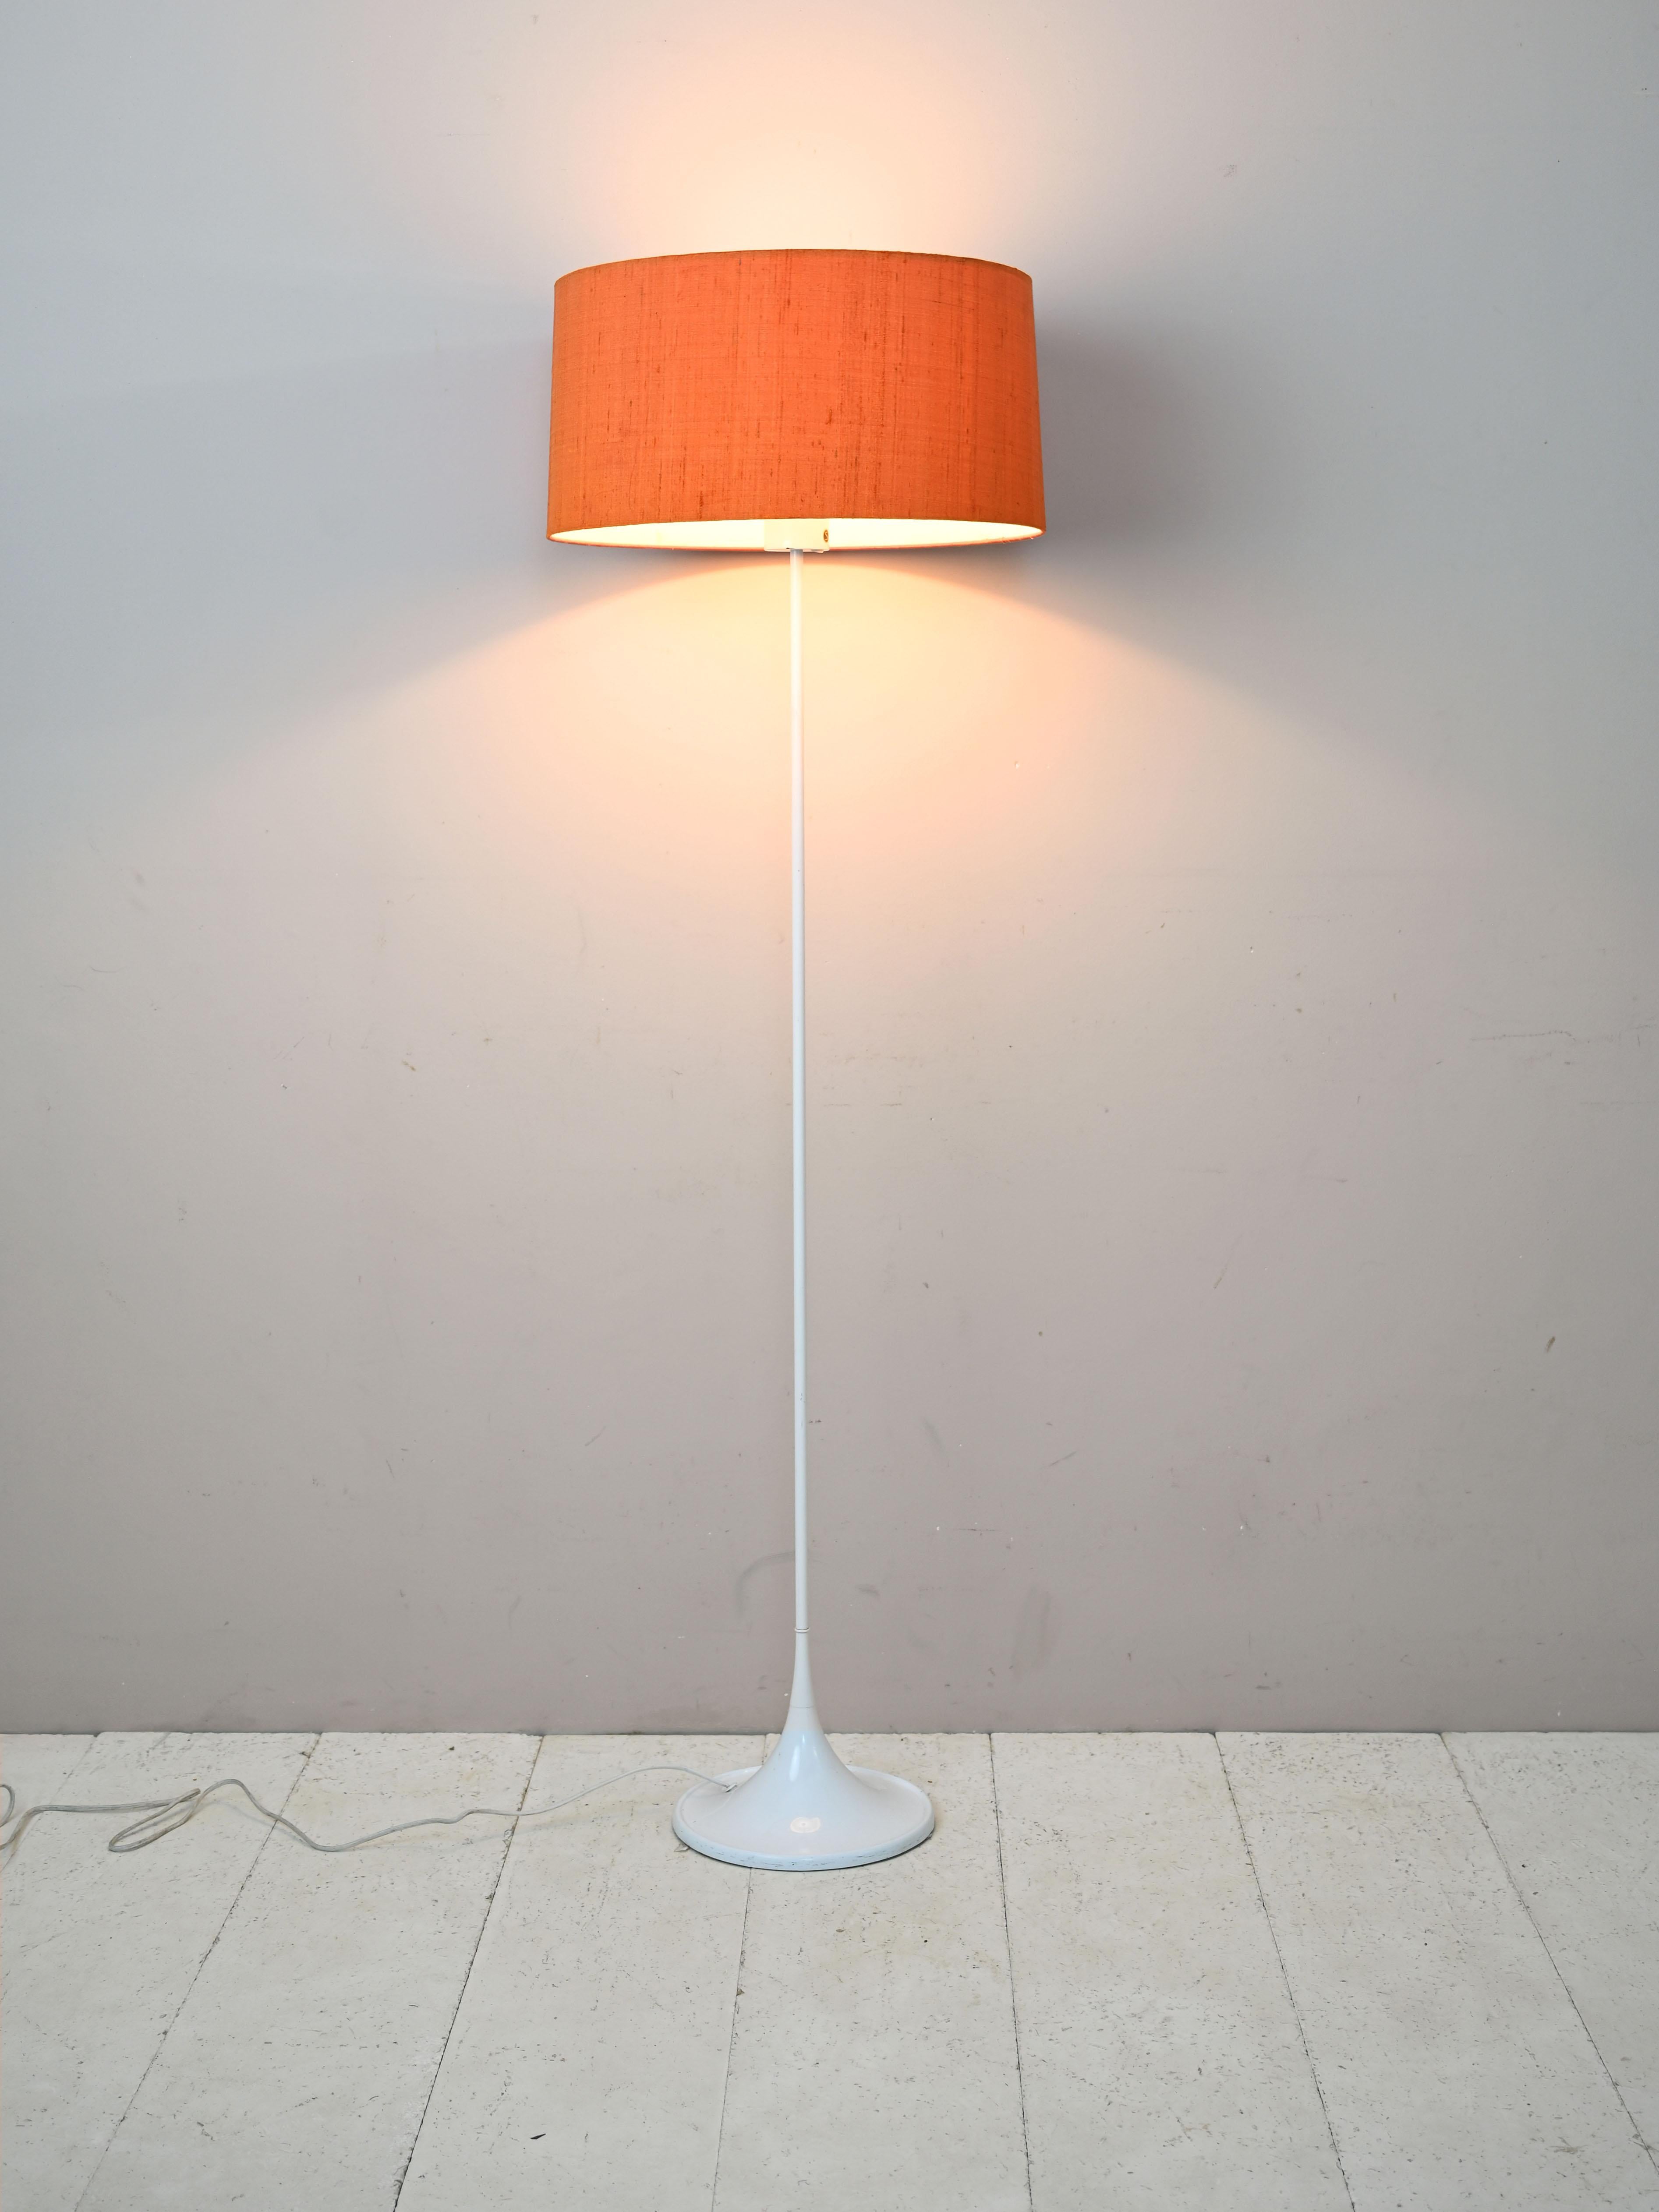 Scandinavian modernist vintage lamp made of plastic and fabric.

Consists of the white plastic frame and orange fabric shade.
Distinguished by the long, slender stem and the wide, colored lampshade that echoes midcentury taste and style.

Good